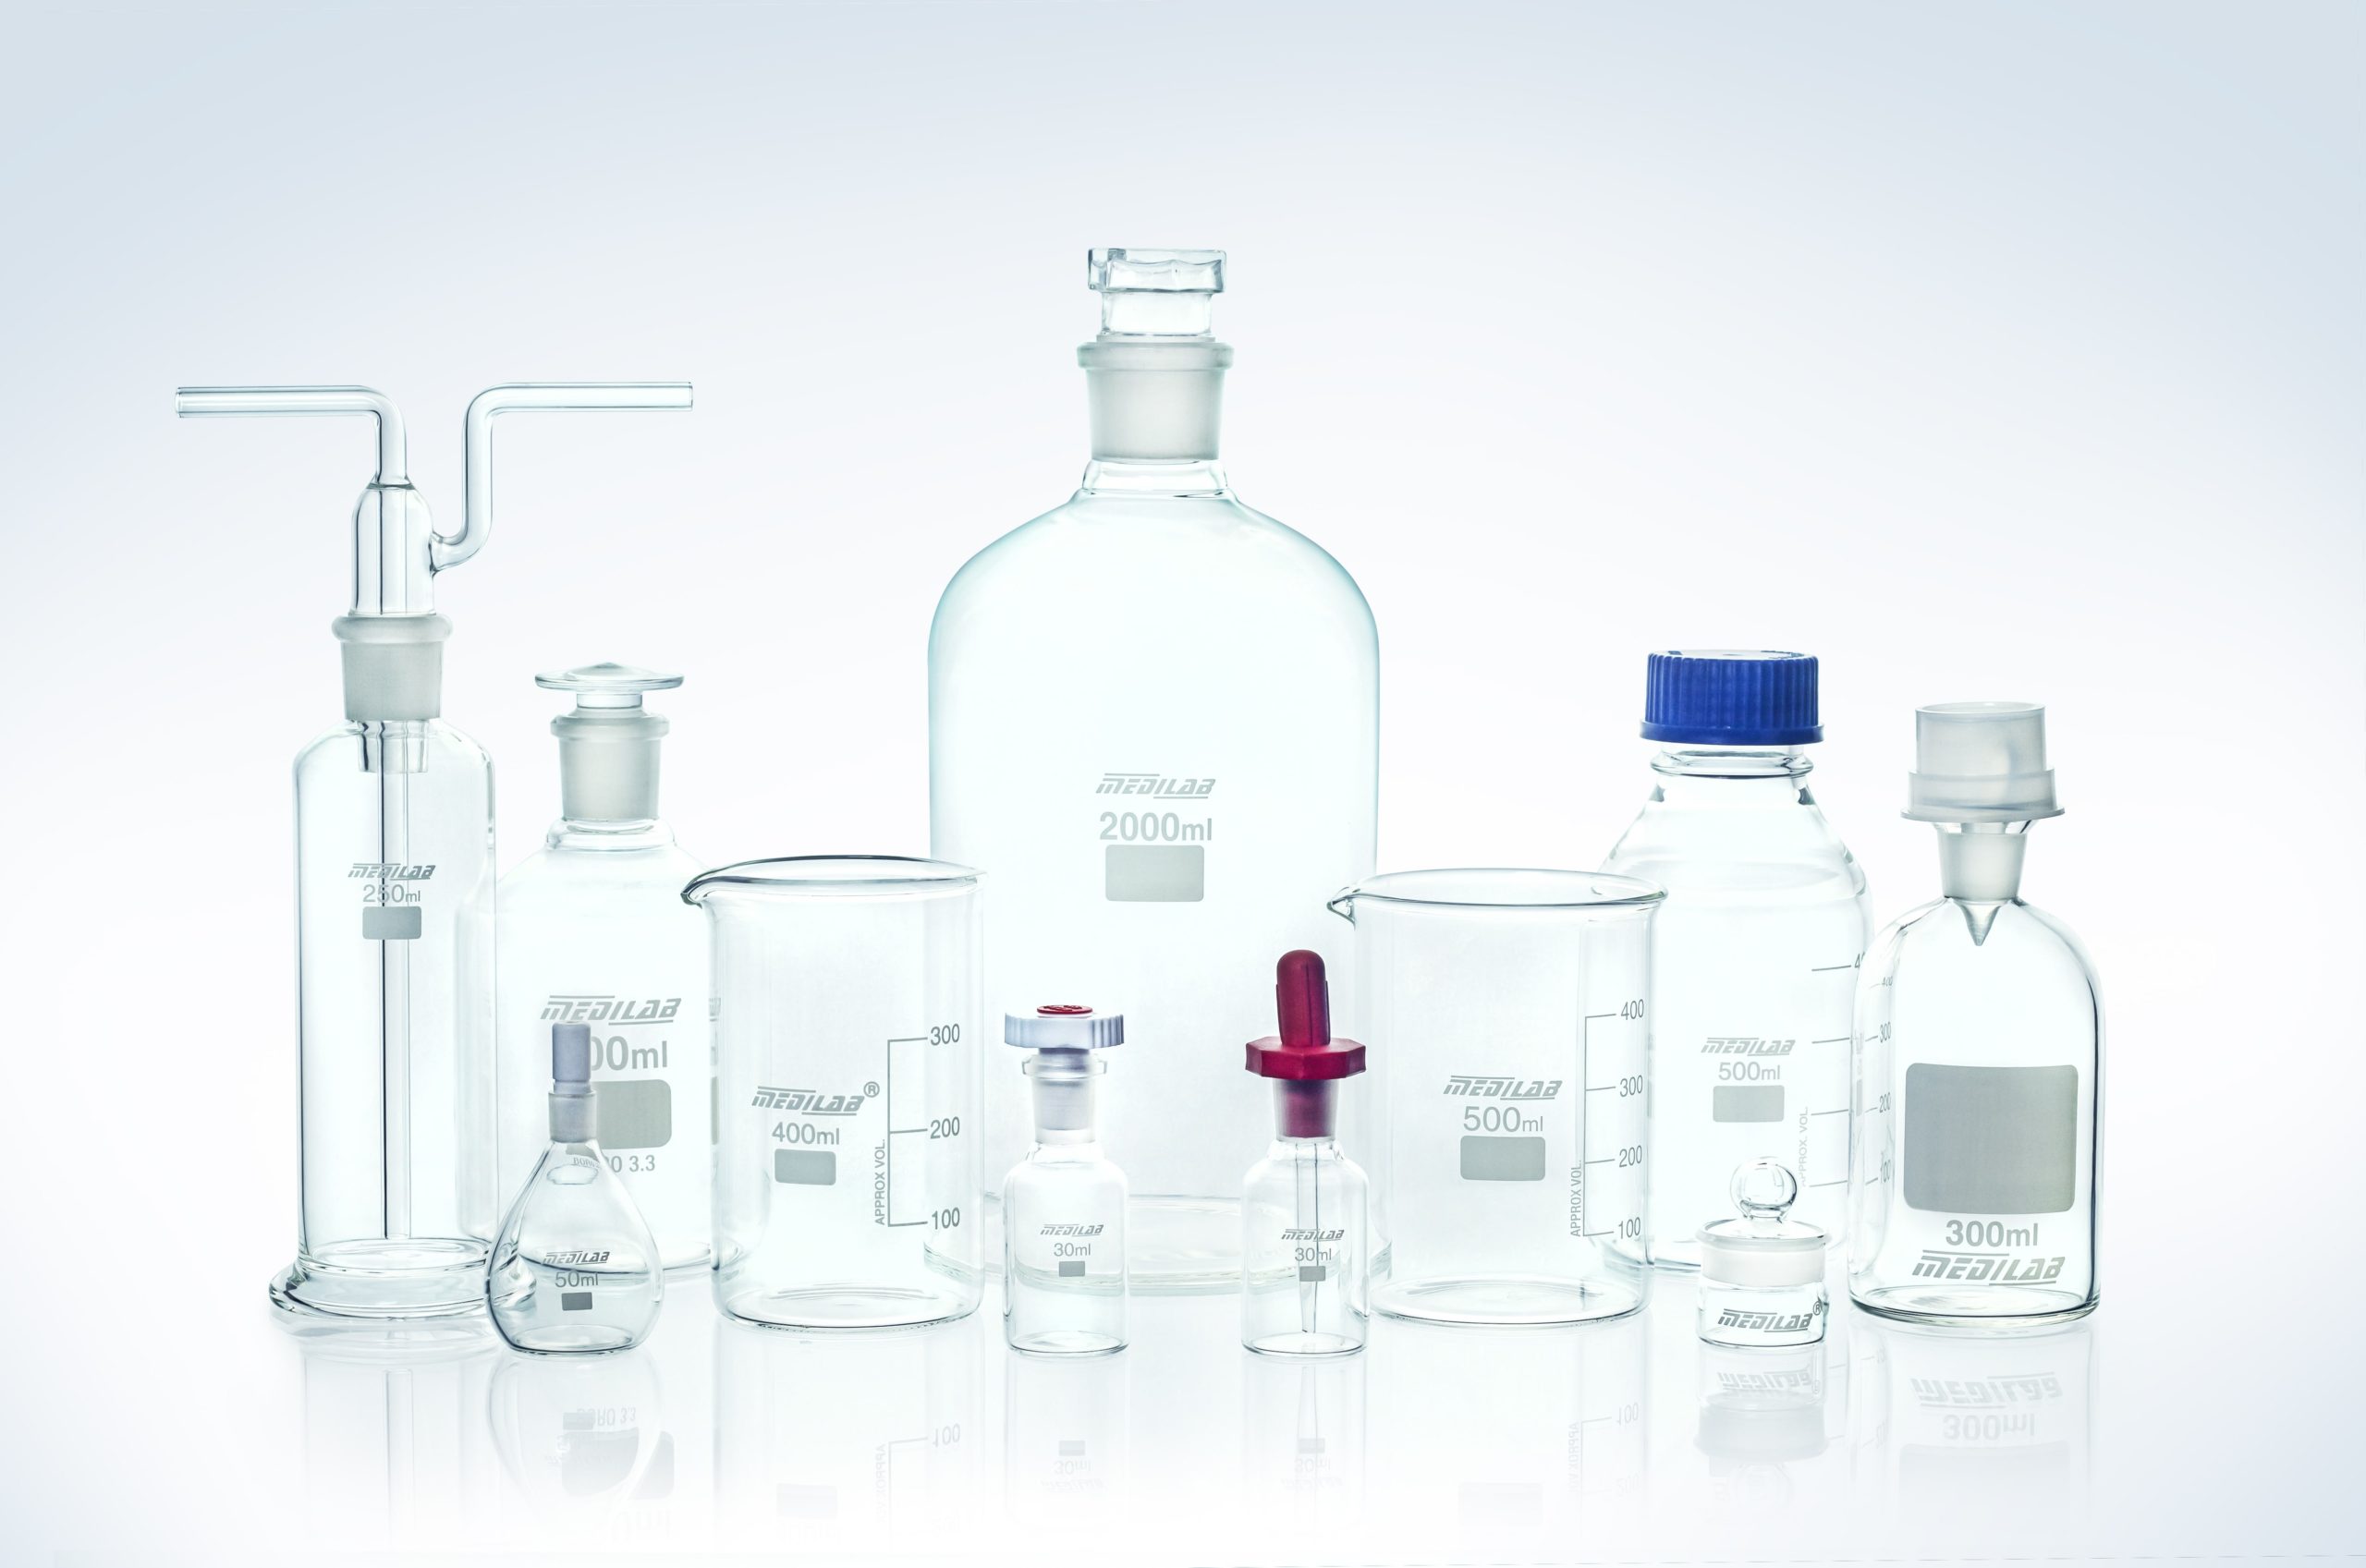 Laboratory glassware instruments. Equipment for chemical lab